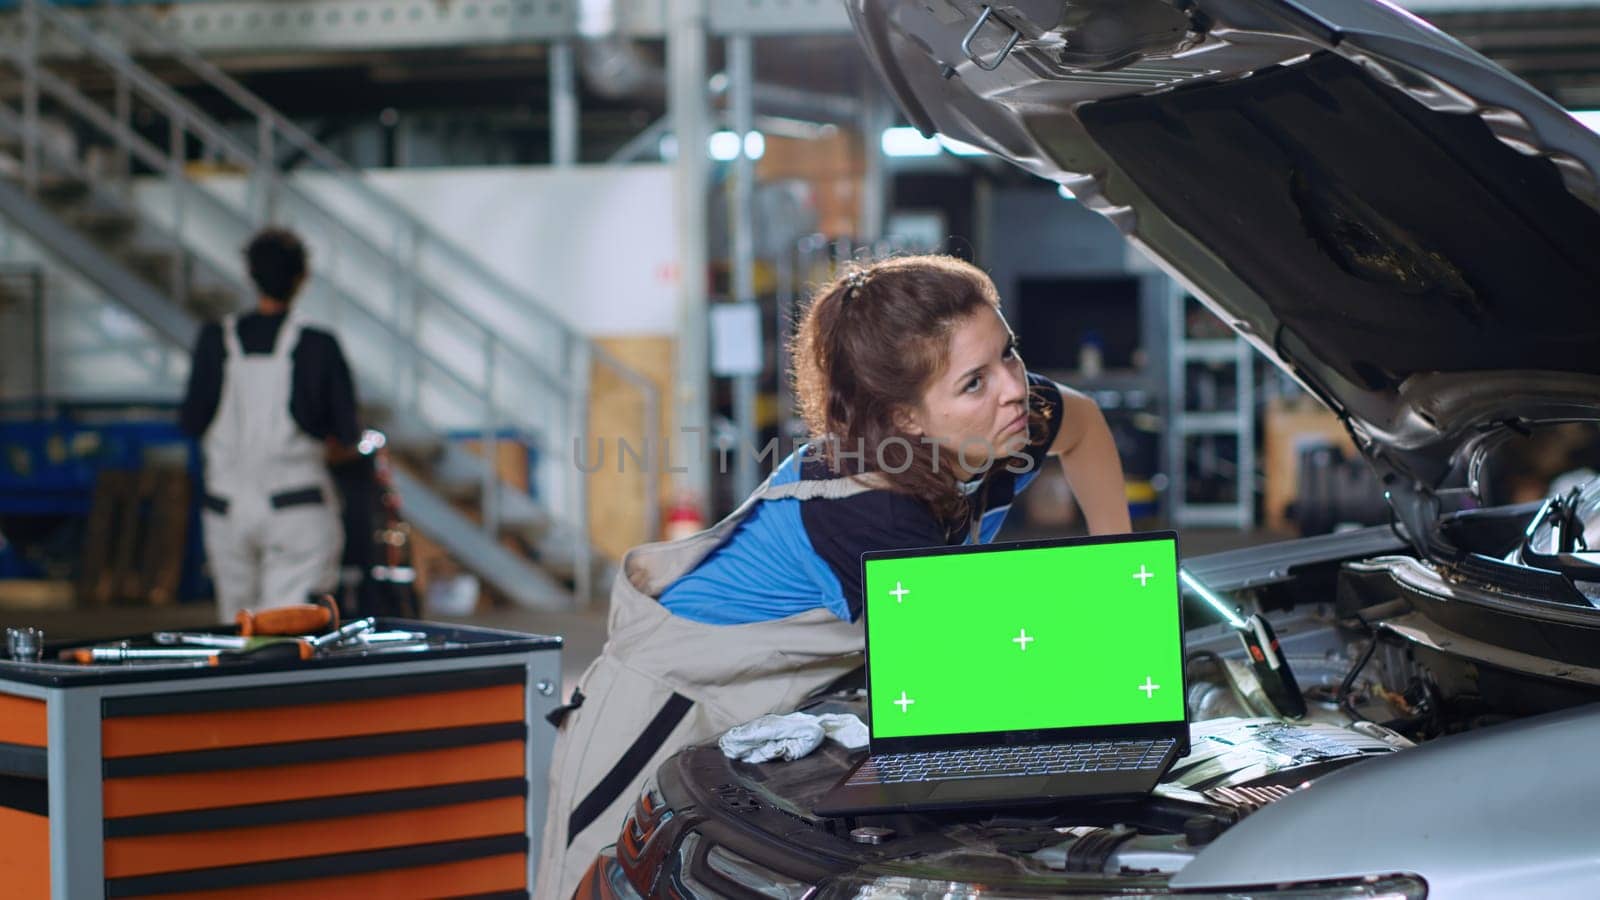 Chroma key laptop in garage facility sitting on malfunctioning car. Green screen device in auto repair shop next to mechanic cleaning vehicle inside engine compartment after fixing it